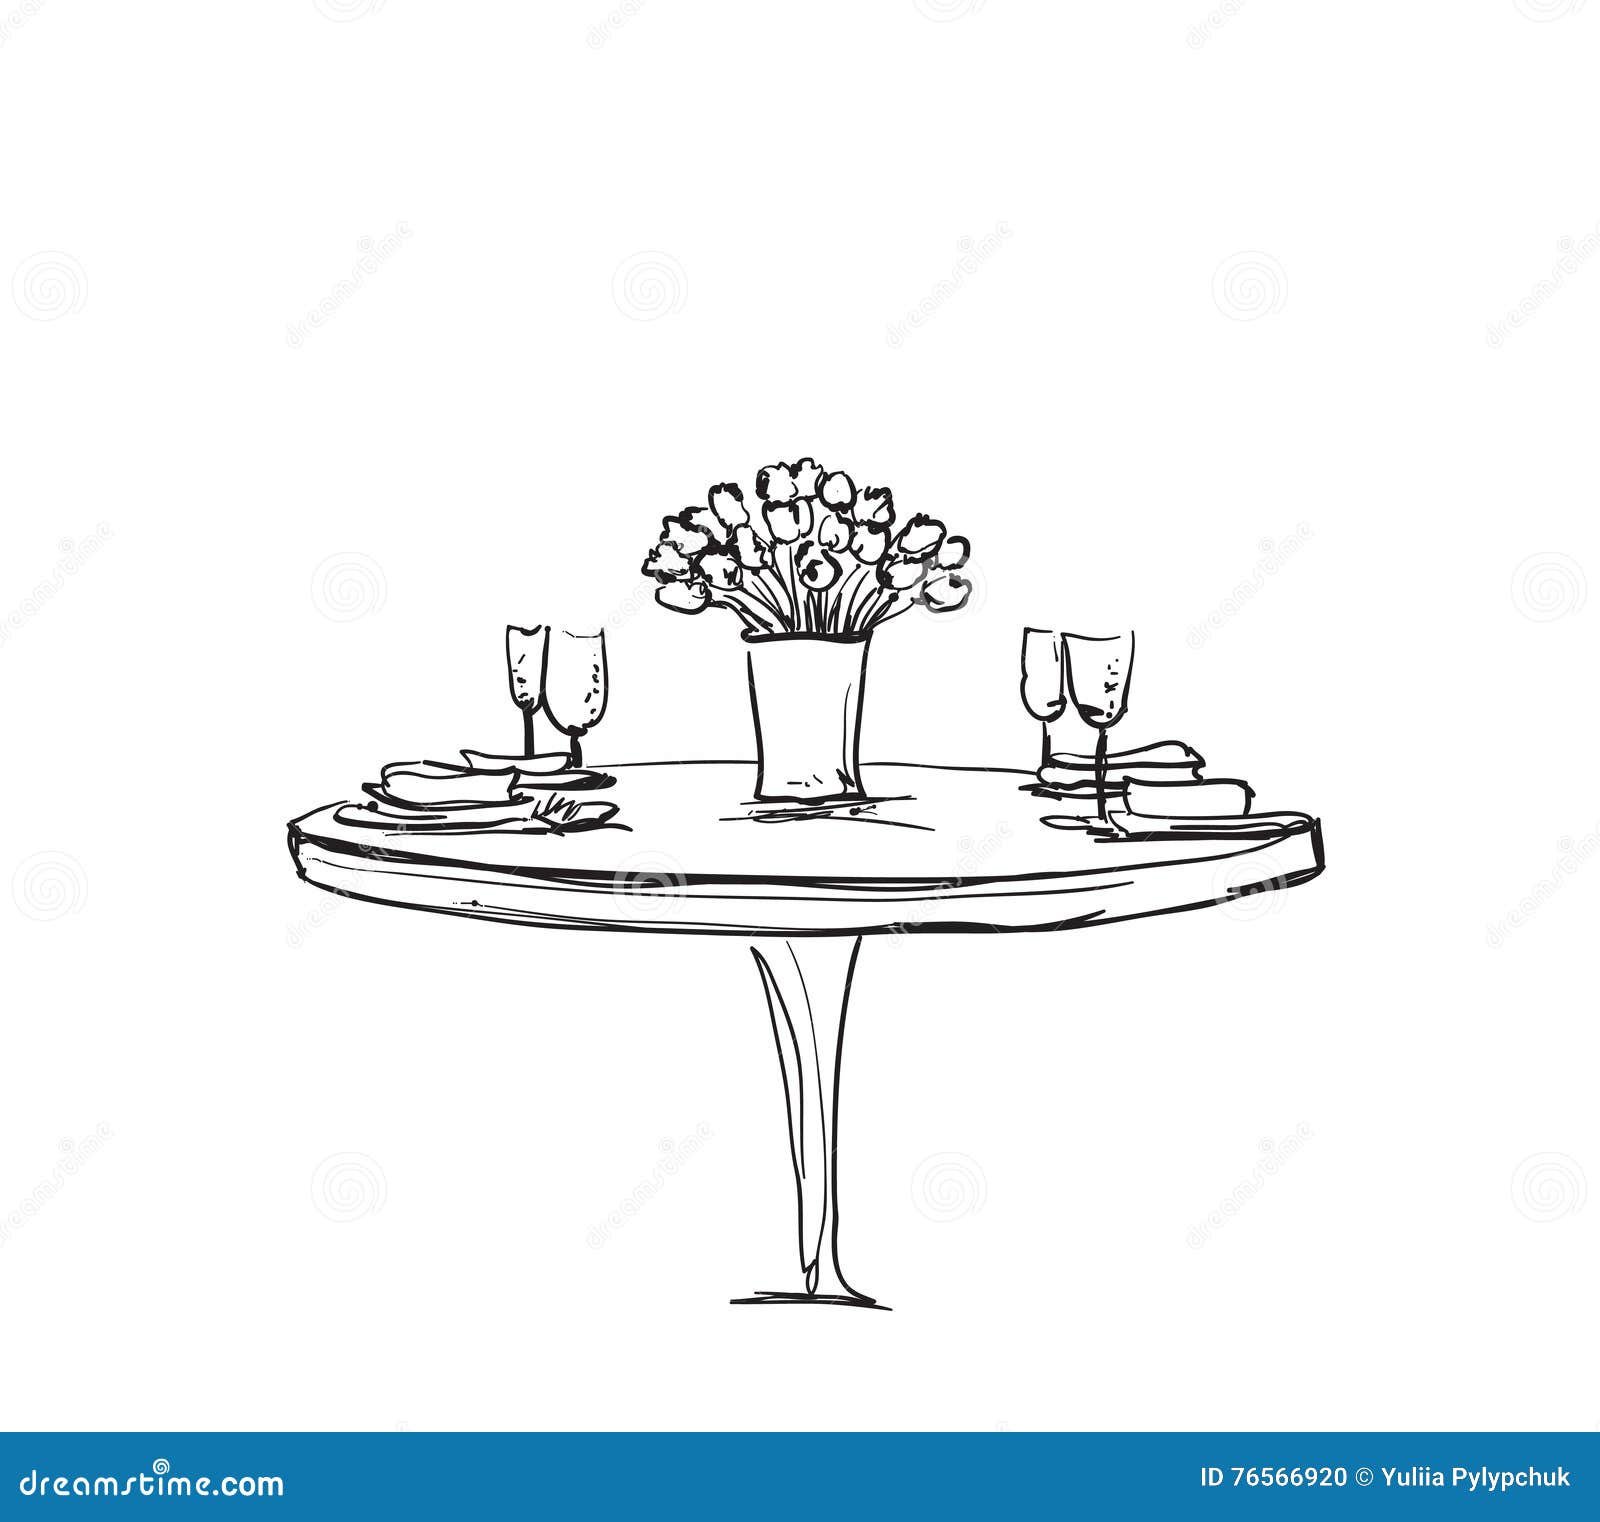 Premium Vector  Hand drawn wares romantic dinner food and drink on table